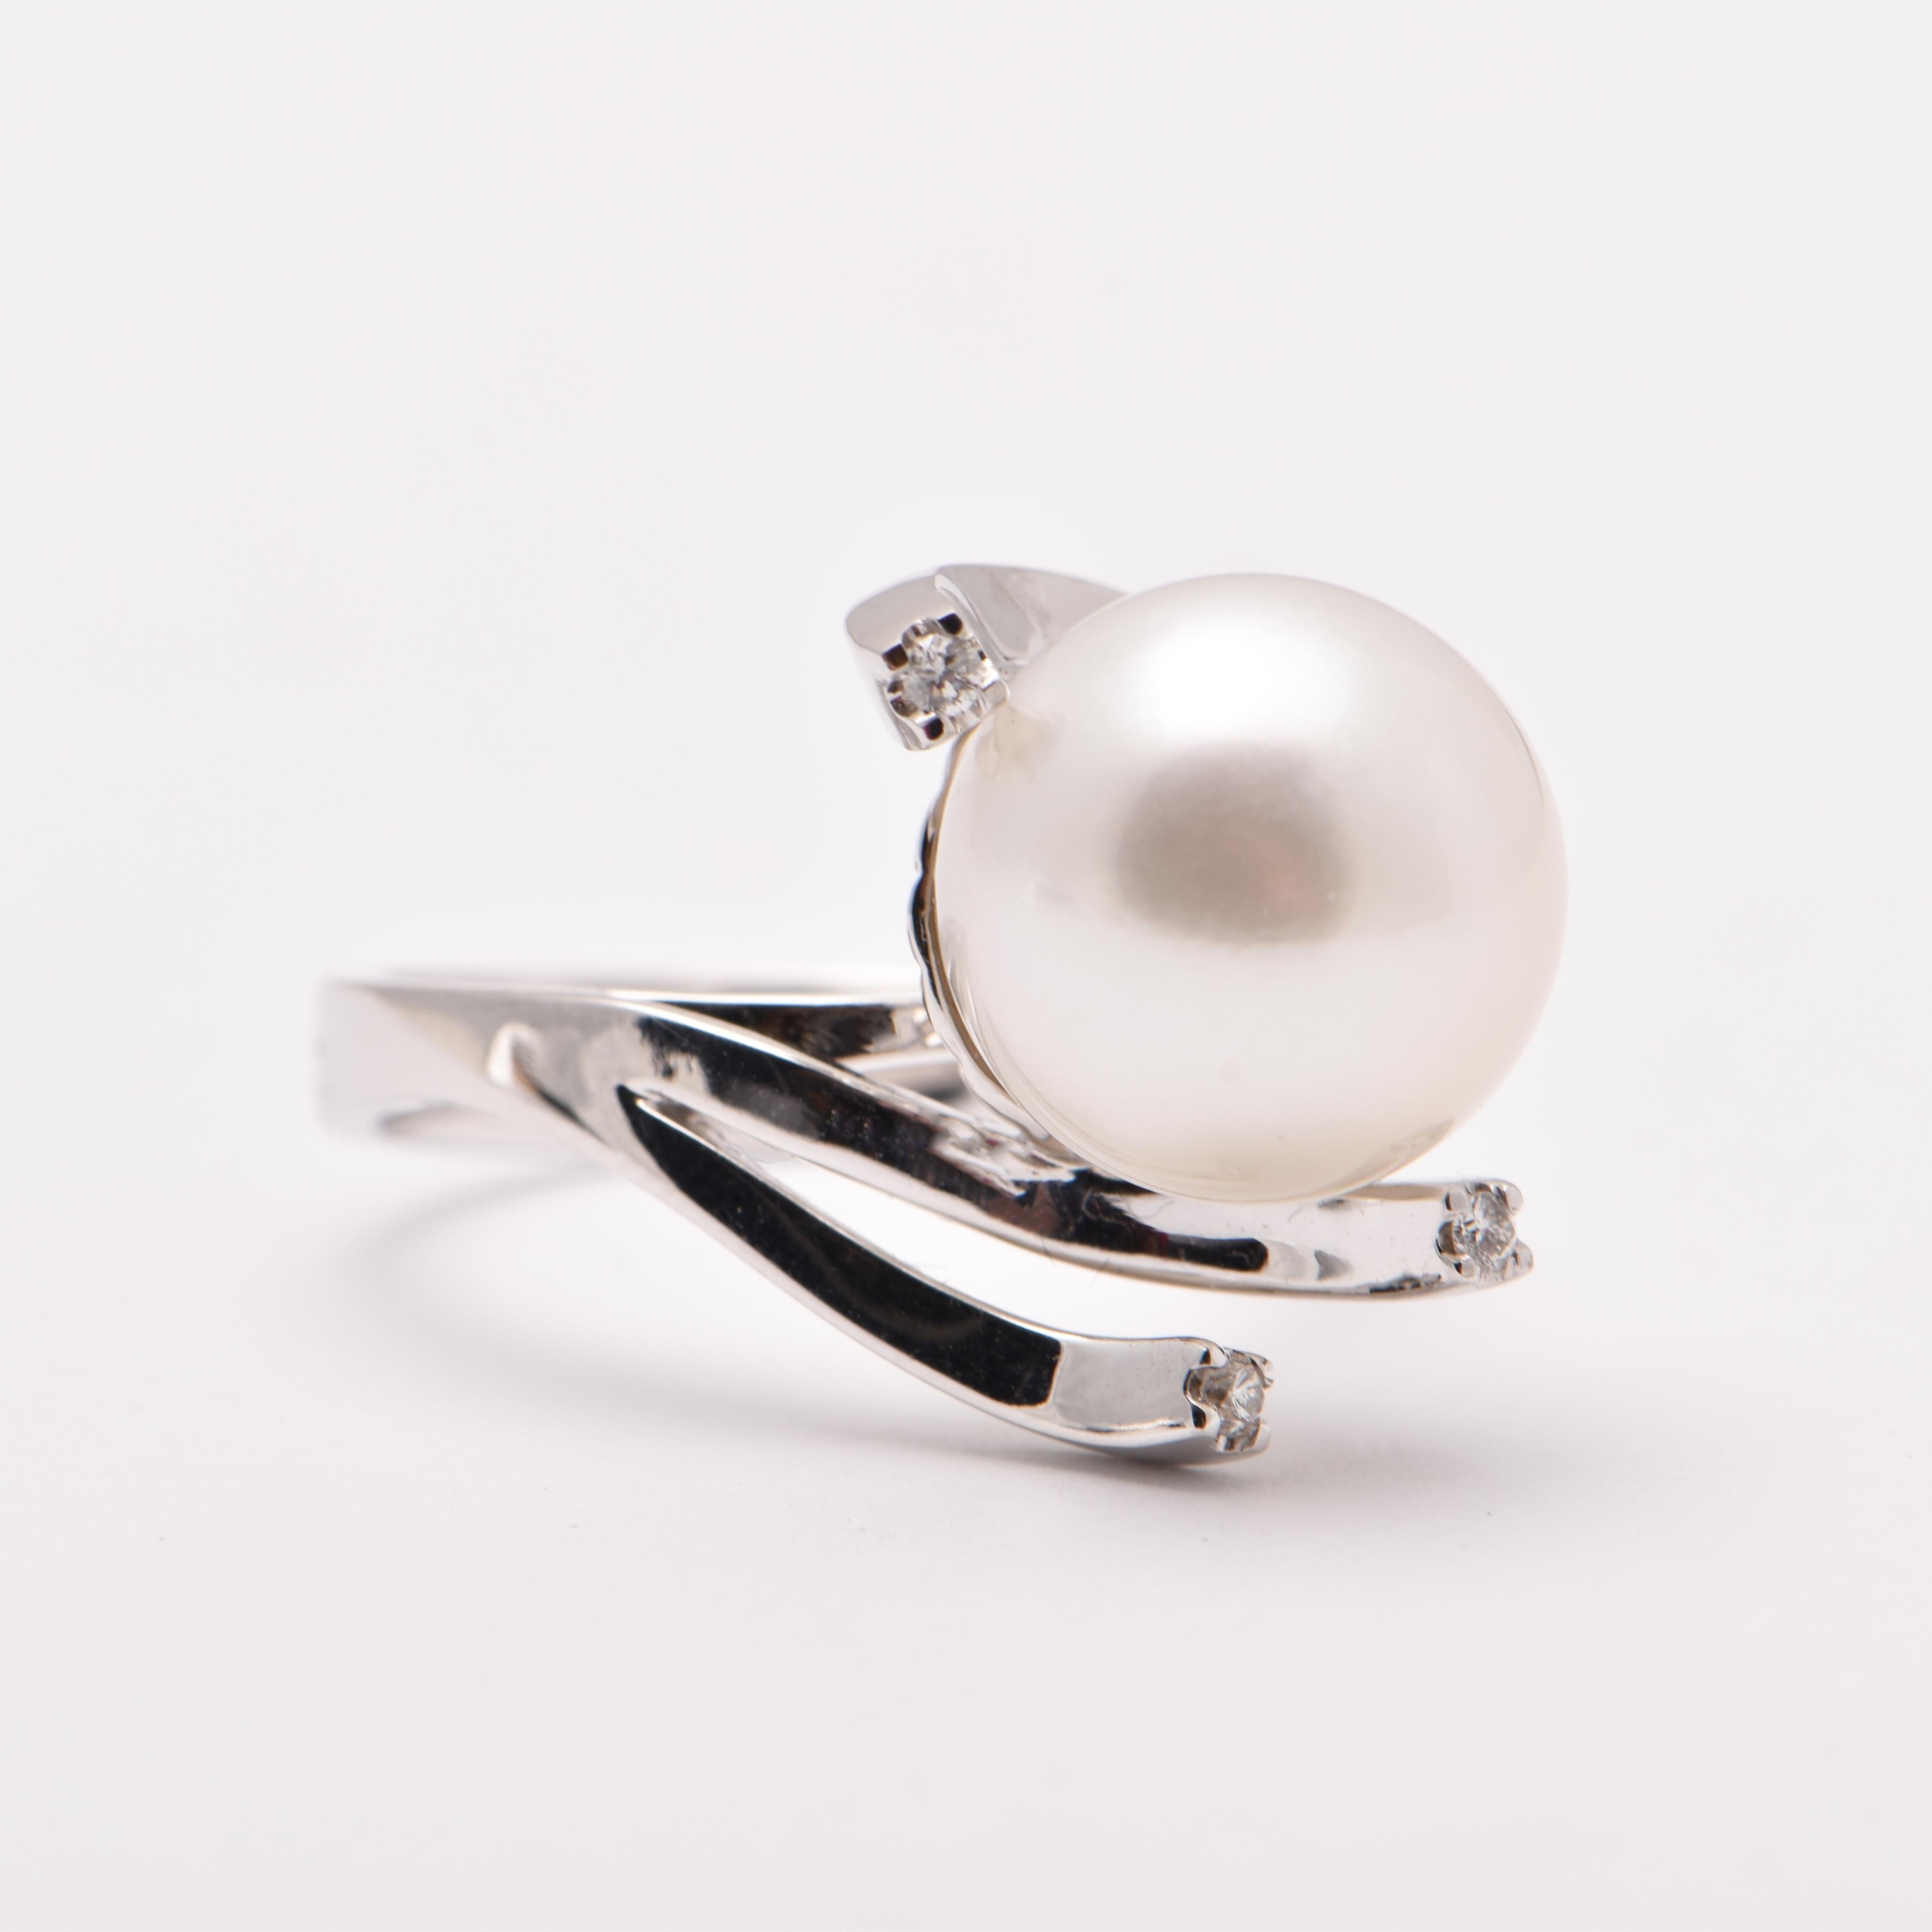 South Sea Pearl and Diamond Abstract Cocktail Ring in 18 Carat White Gold by Cartmer Jewellery

Size M-N

1 South Sea Pearl
4 Diamonds totalling 0.07 carats
18 Carat White Gold Ring


FREE express postage usually 3-4 days Sydney to New York
FREE